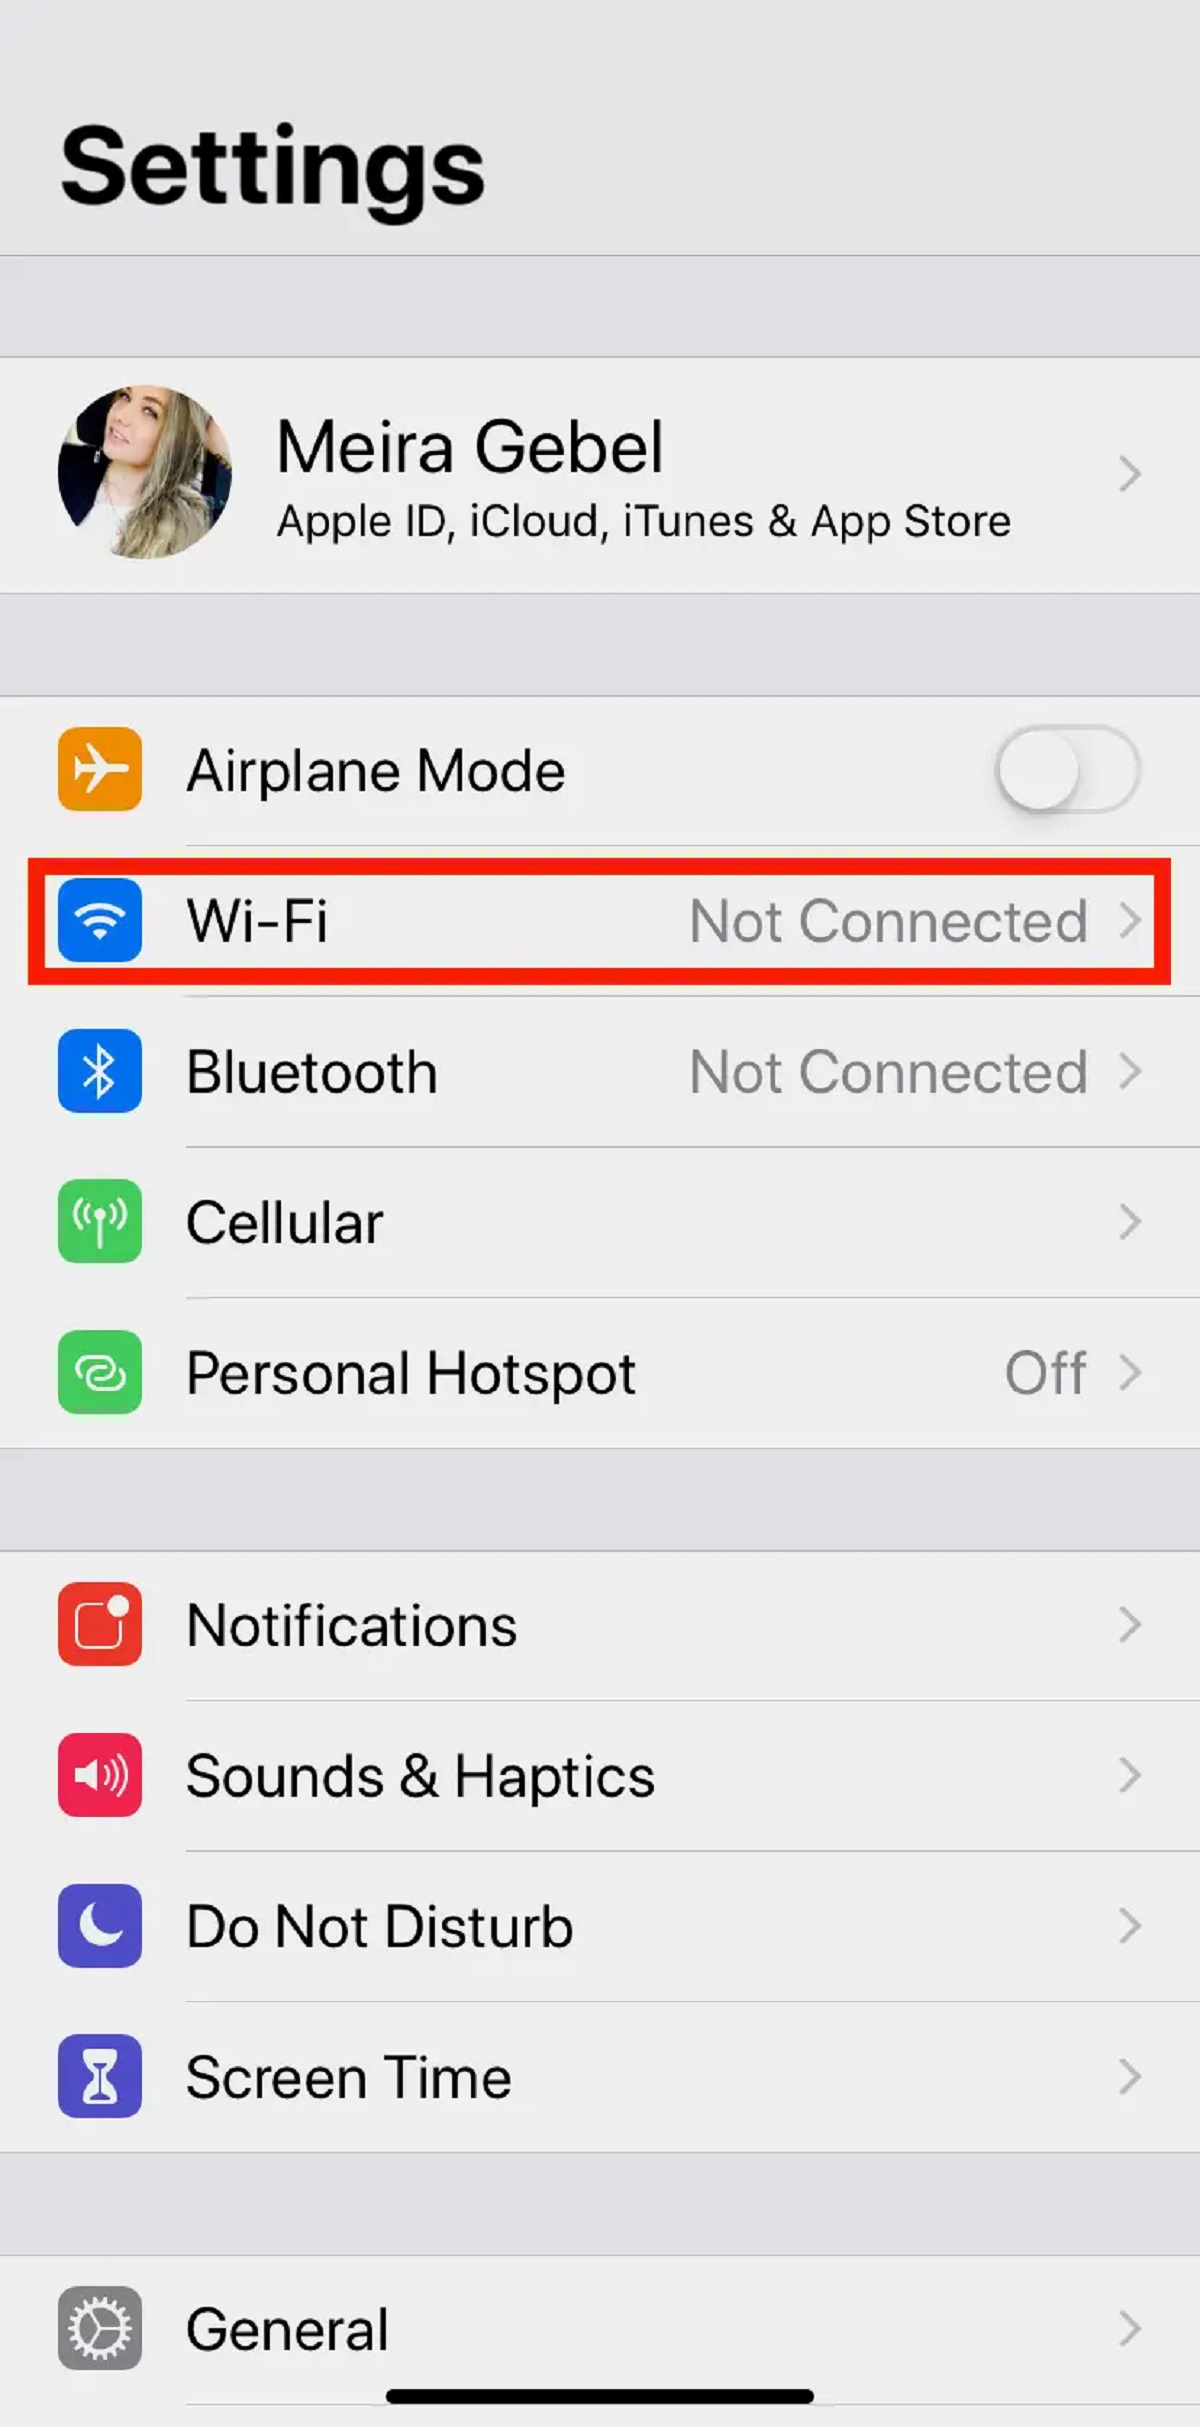 How To Connect To Wifi On Iphone